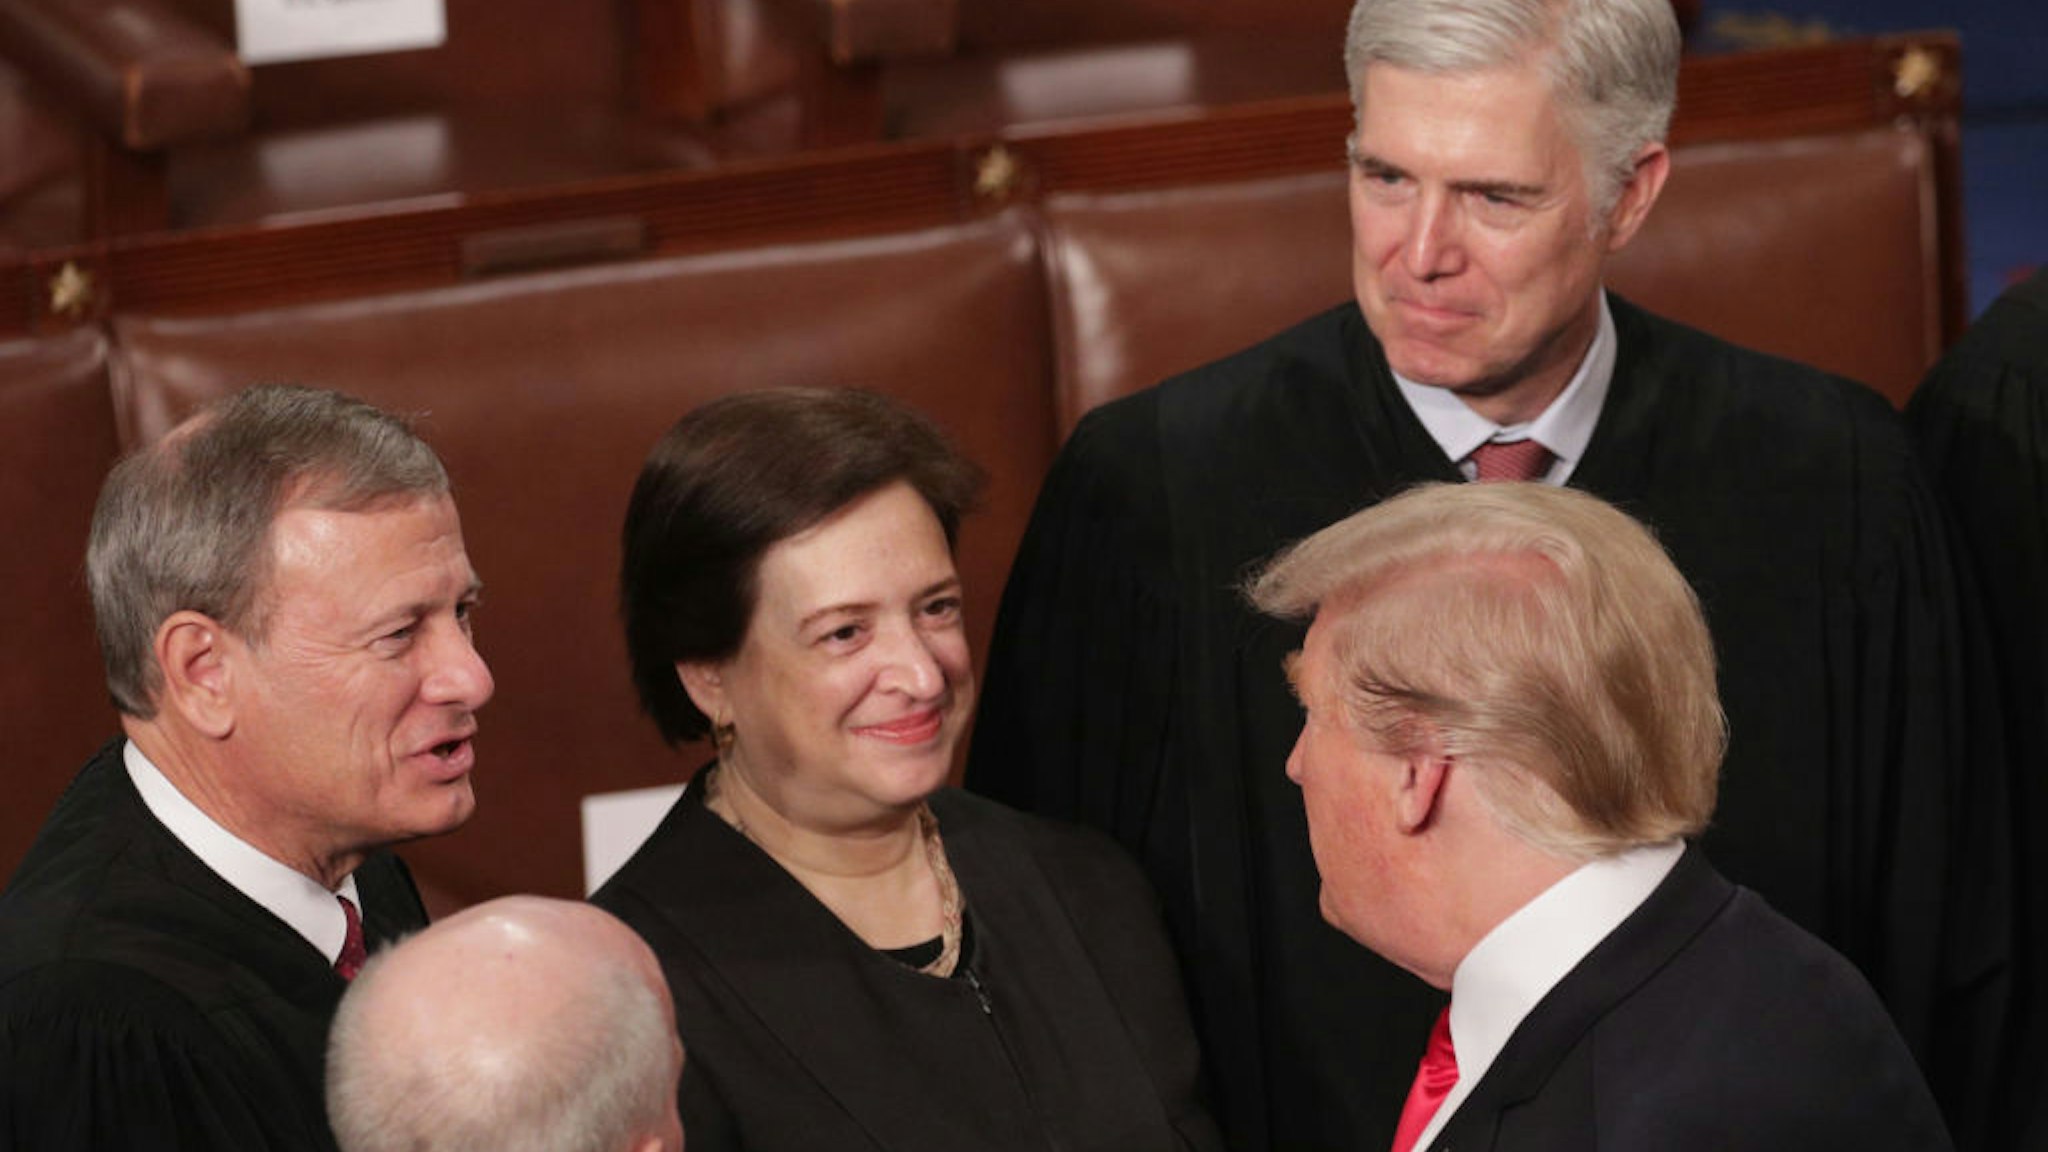 President Donald Trump greets Supreme Court Justices John Roberts, Elena Kagan, and Neil Gorsuch after the State of the Union address in the chamber of the U.S. House of Representatives at the U.S. Capitol Building on February 5, 2019 in Washington, DC.